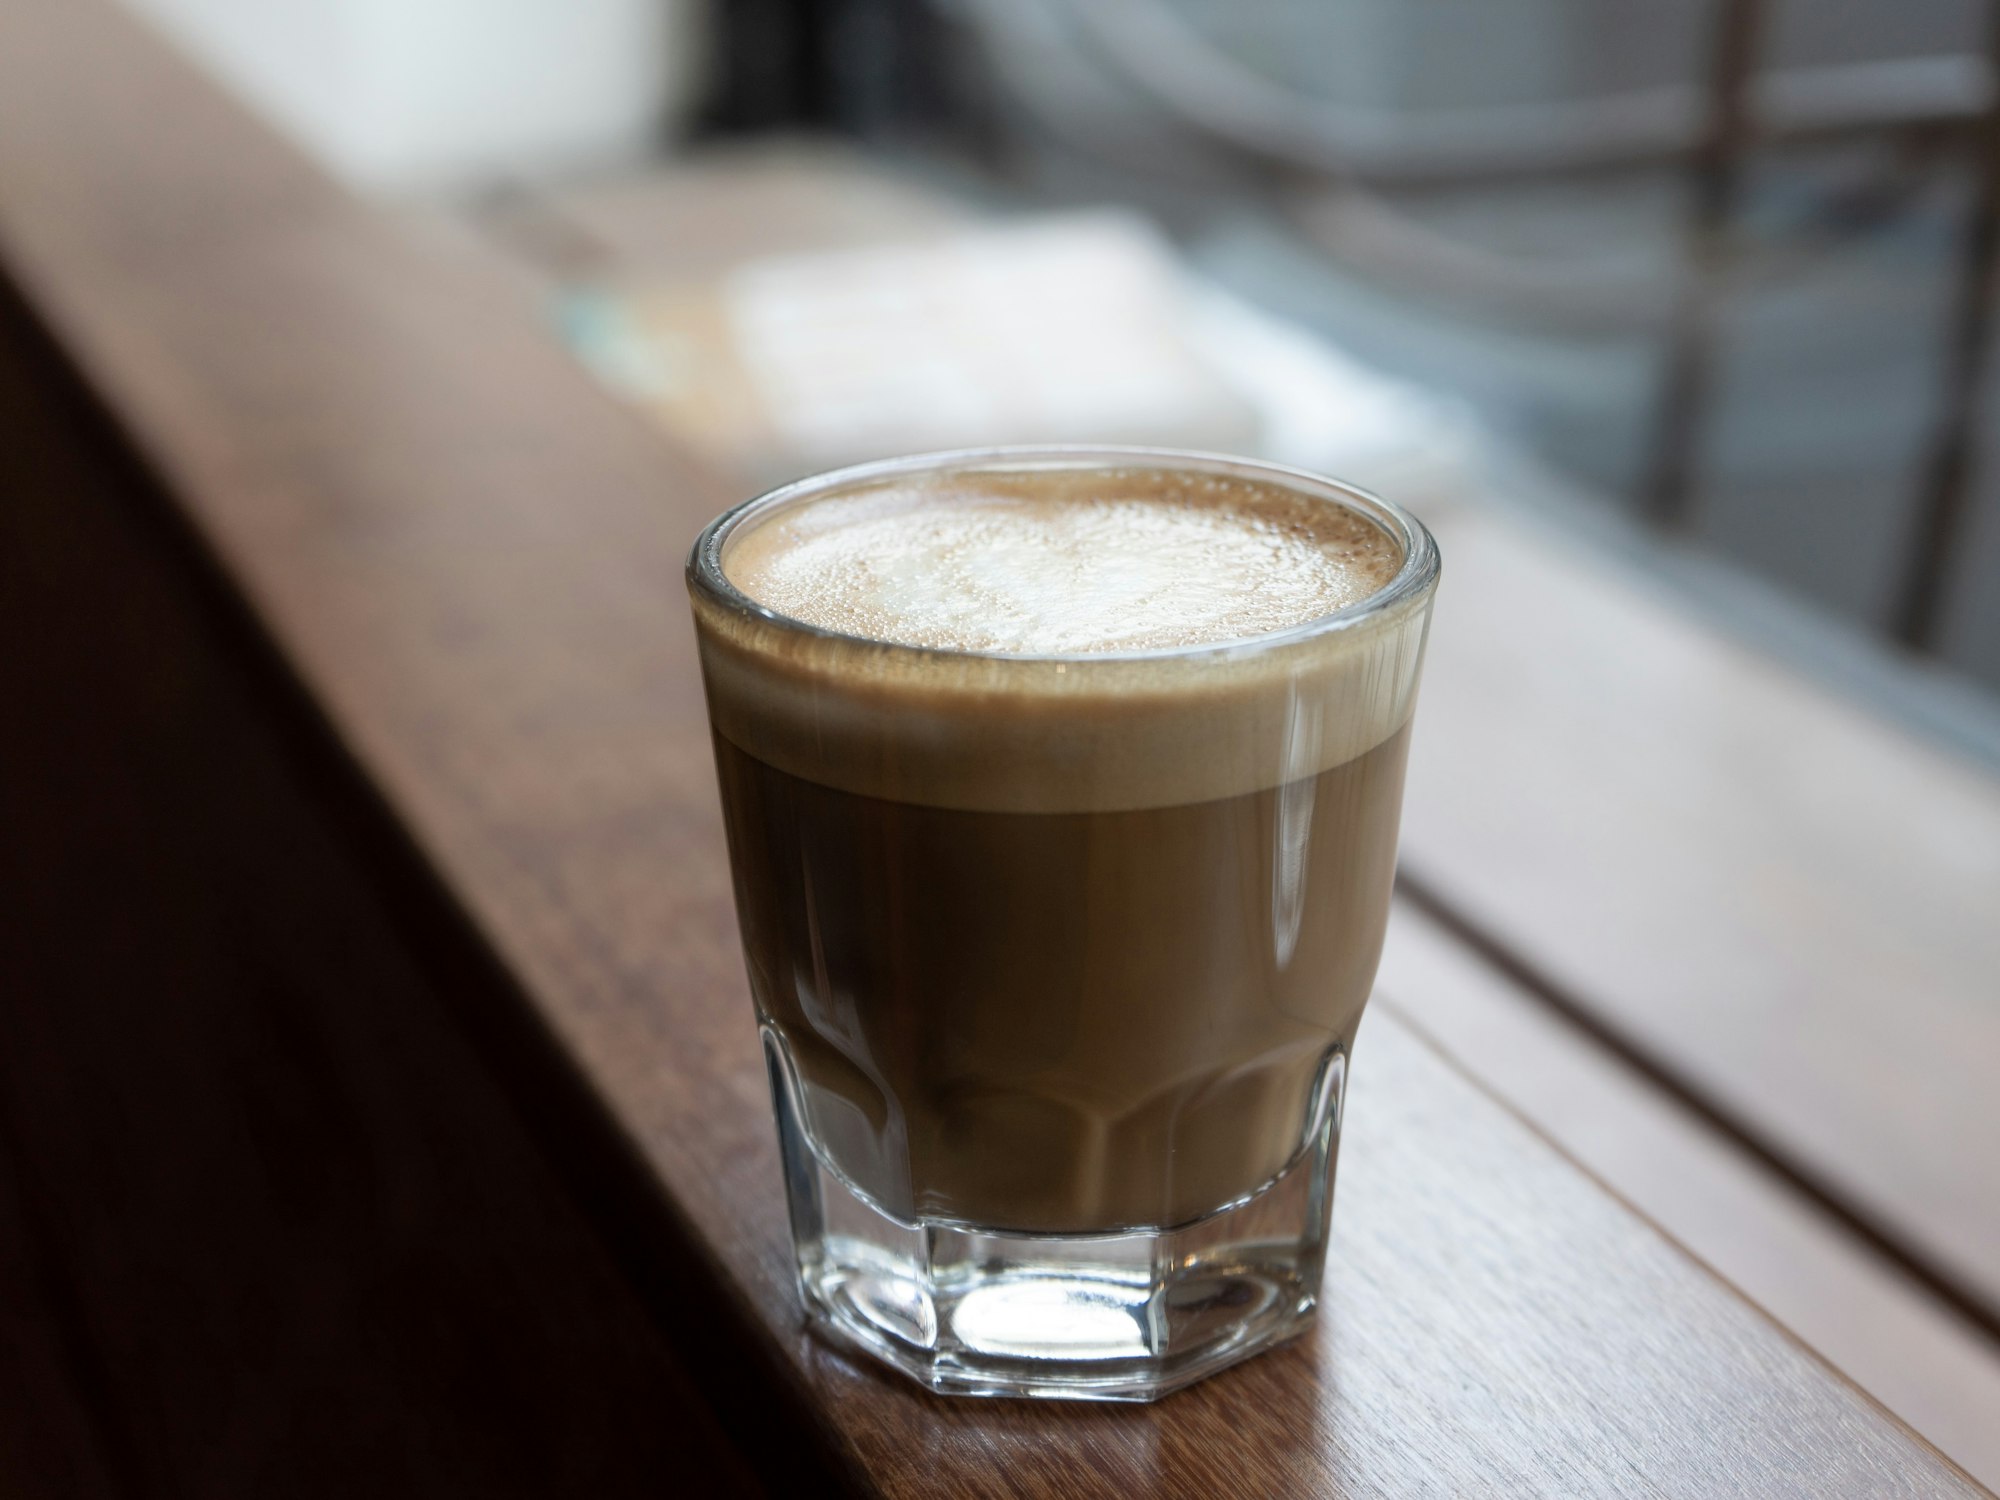 Glass coffee cup on wooden ledge with shallow focus window in background